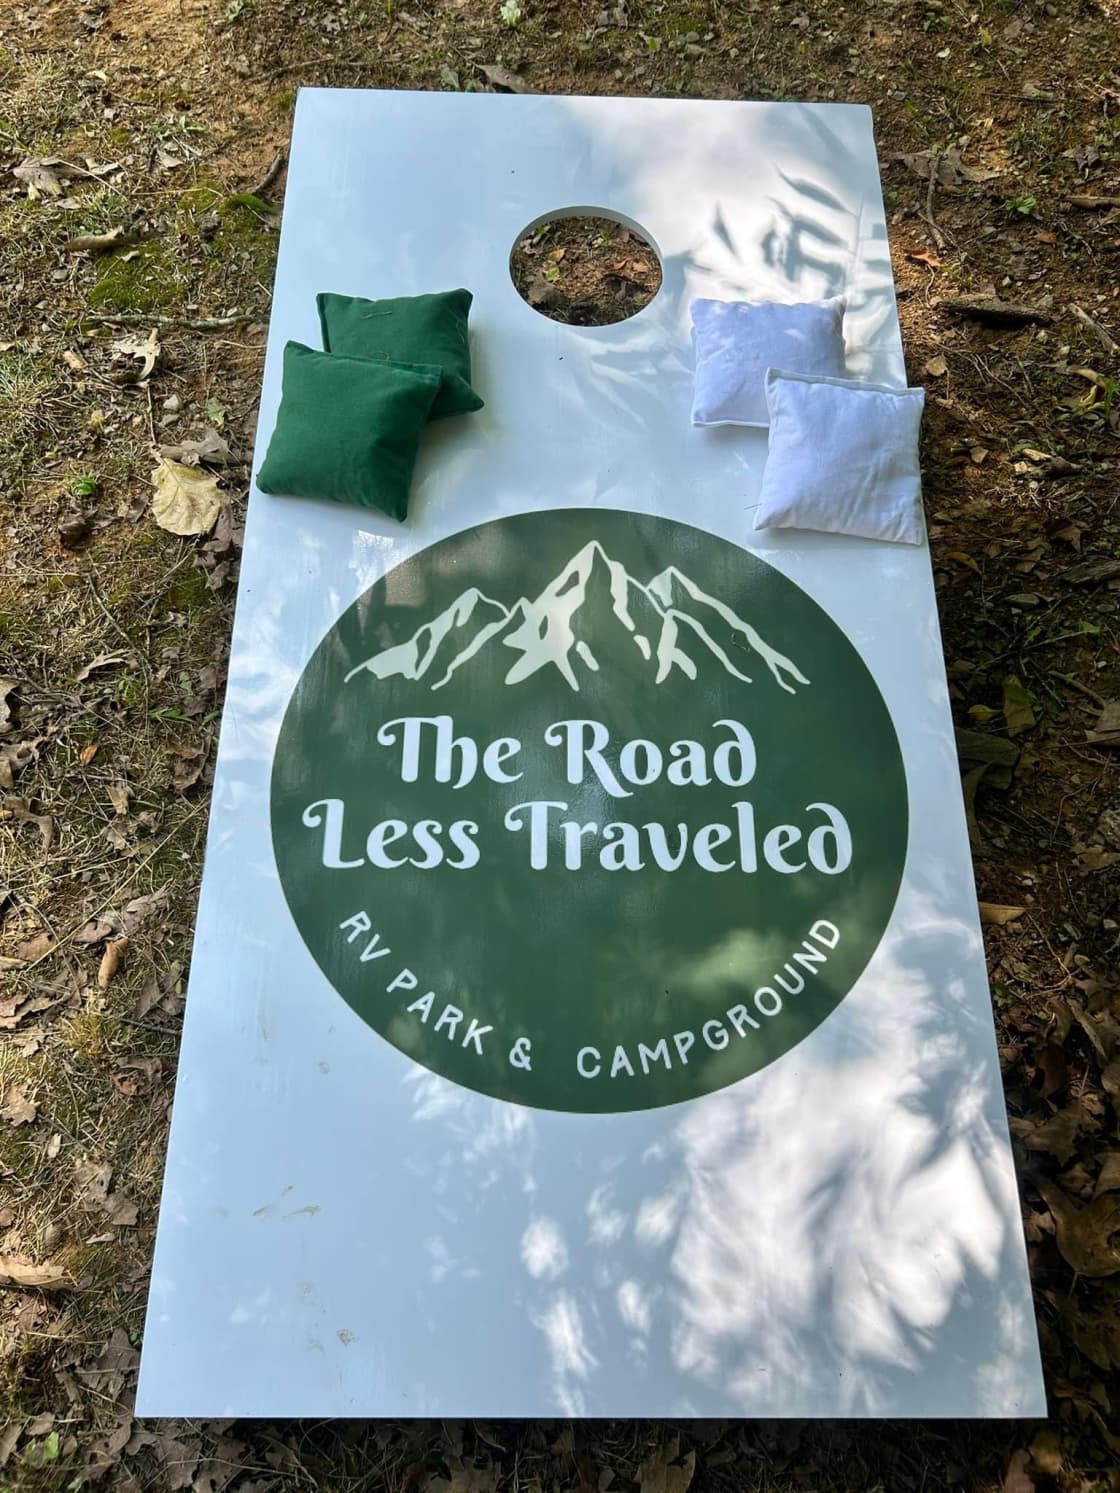 The Road Less Traveled RV & Camping